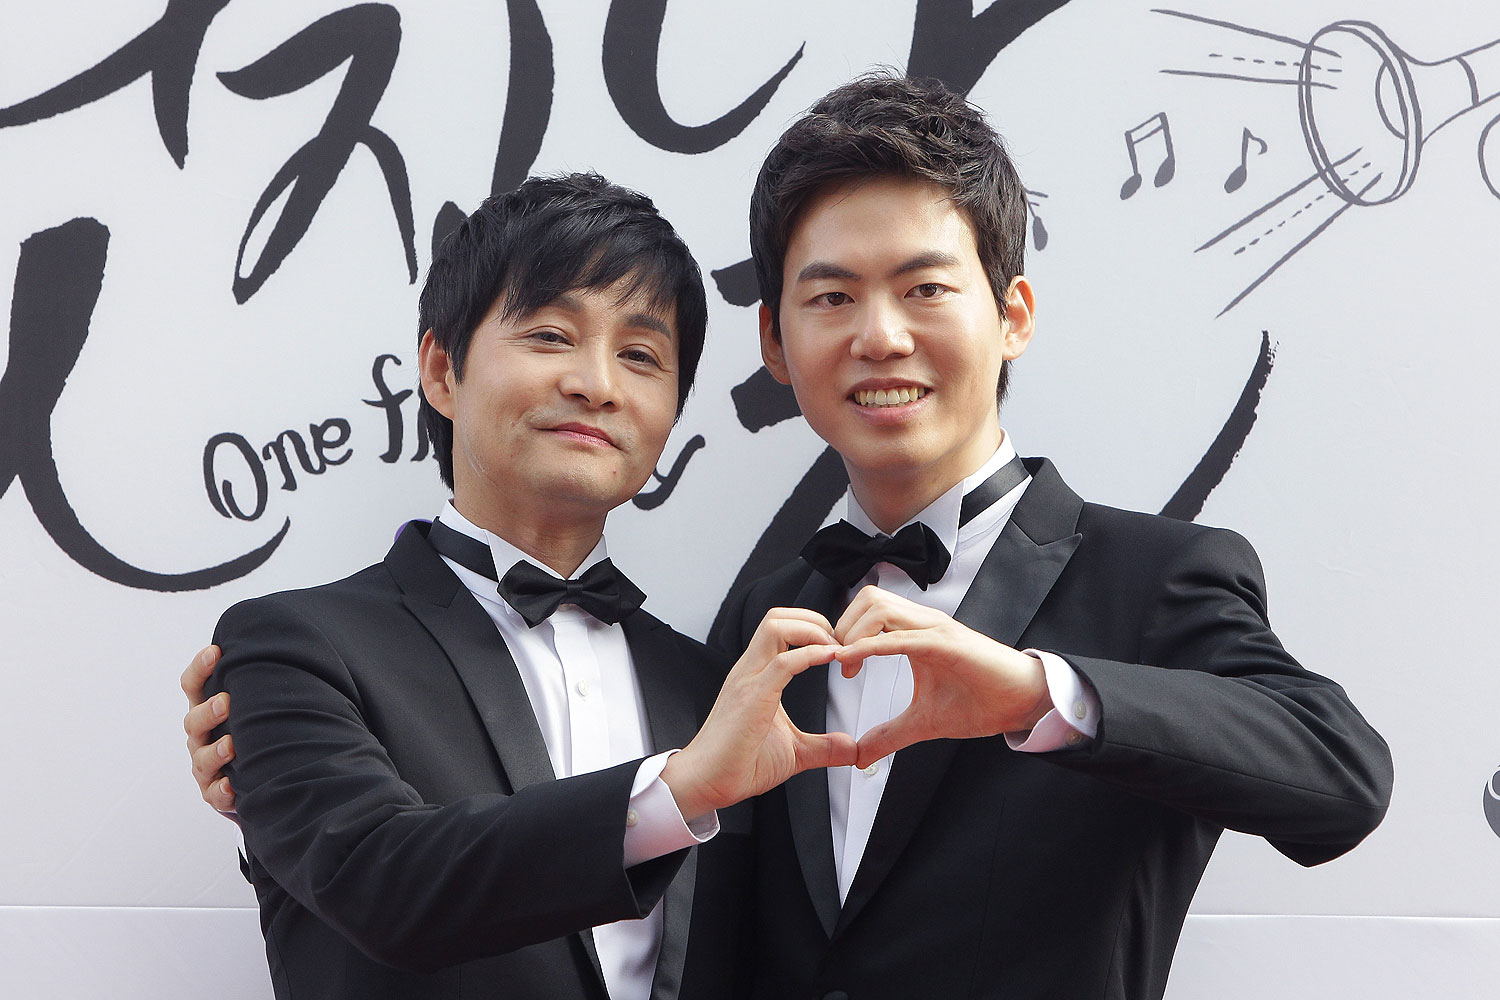 Director Kim Jho Kwang-Soo and Kim Seung-Hwan pose before their wedding in Seoul in Sept. 2013 (Chung Sung-Jun / Getty Images)